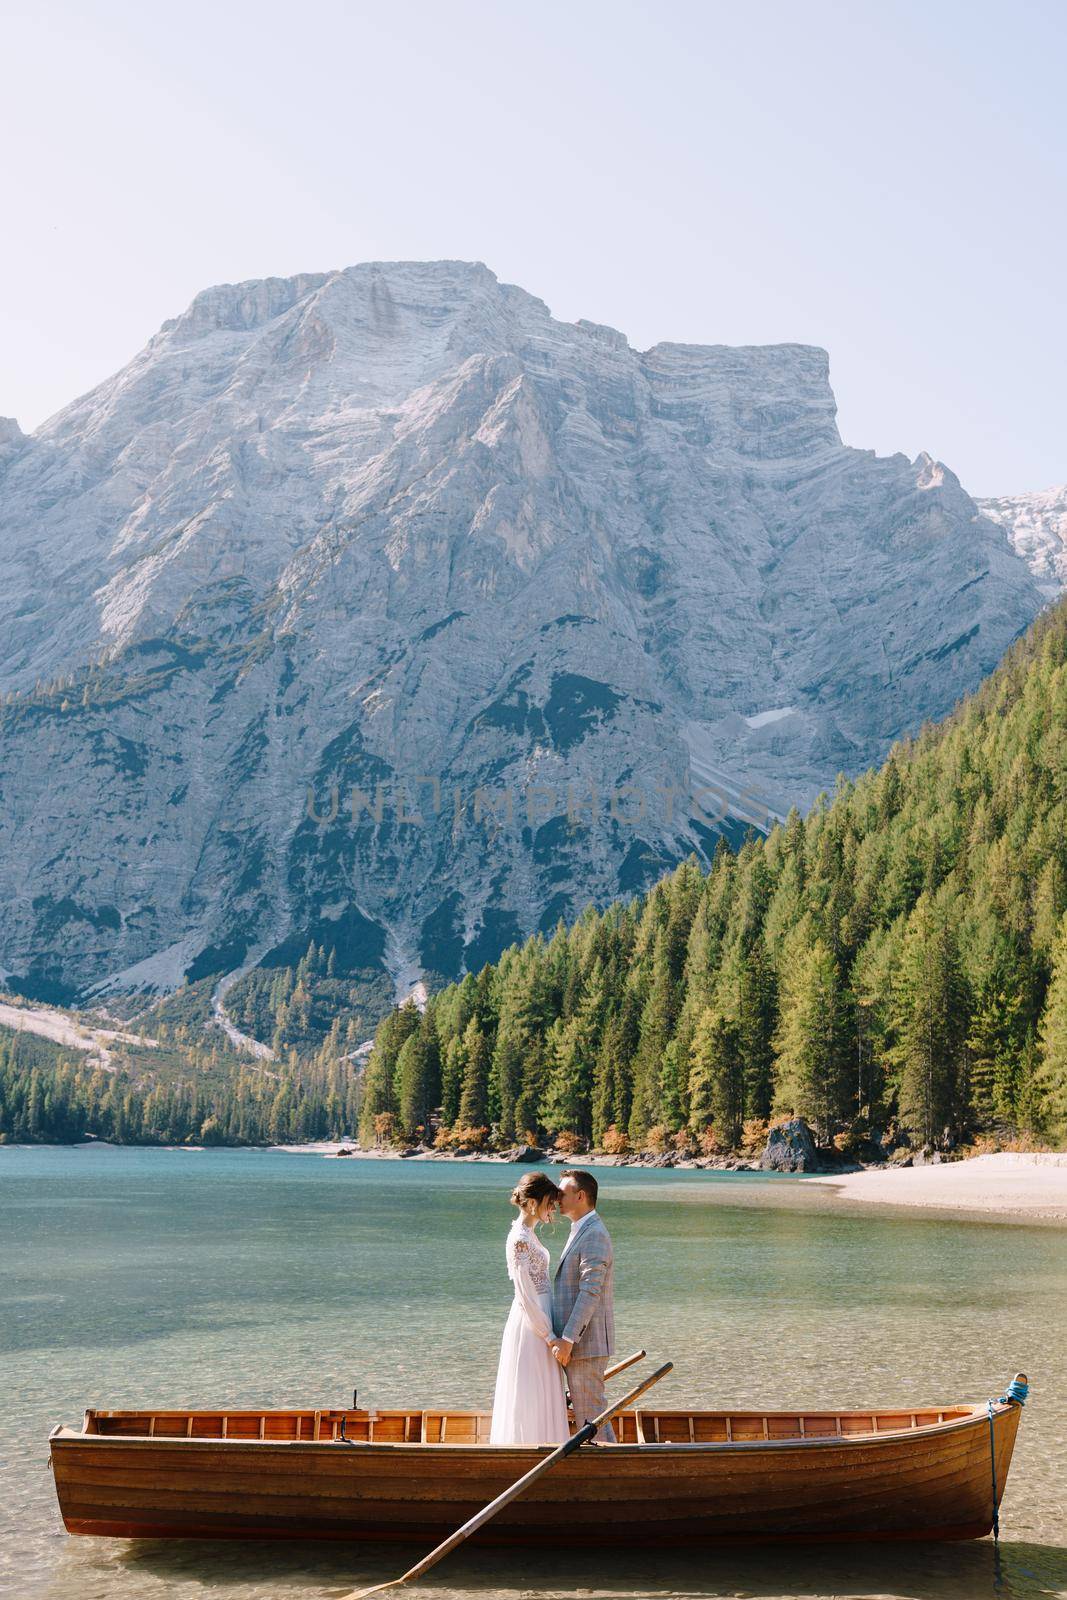 The bride and groom in a wooden boat at Lago di Braies in Italy. Wedding couple in Europe, at Braies lake. The newlyweds stand in the boat and cuddle.